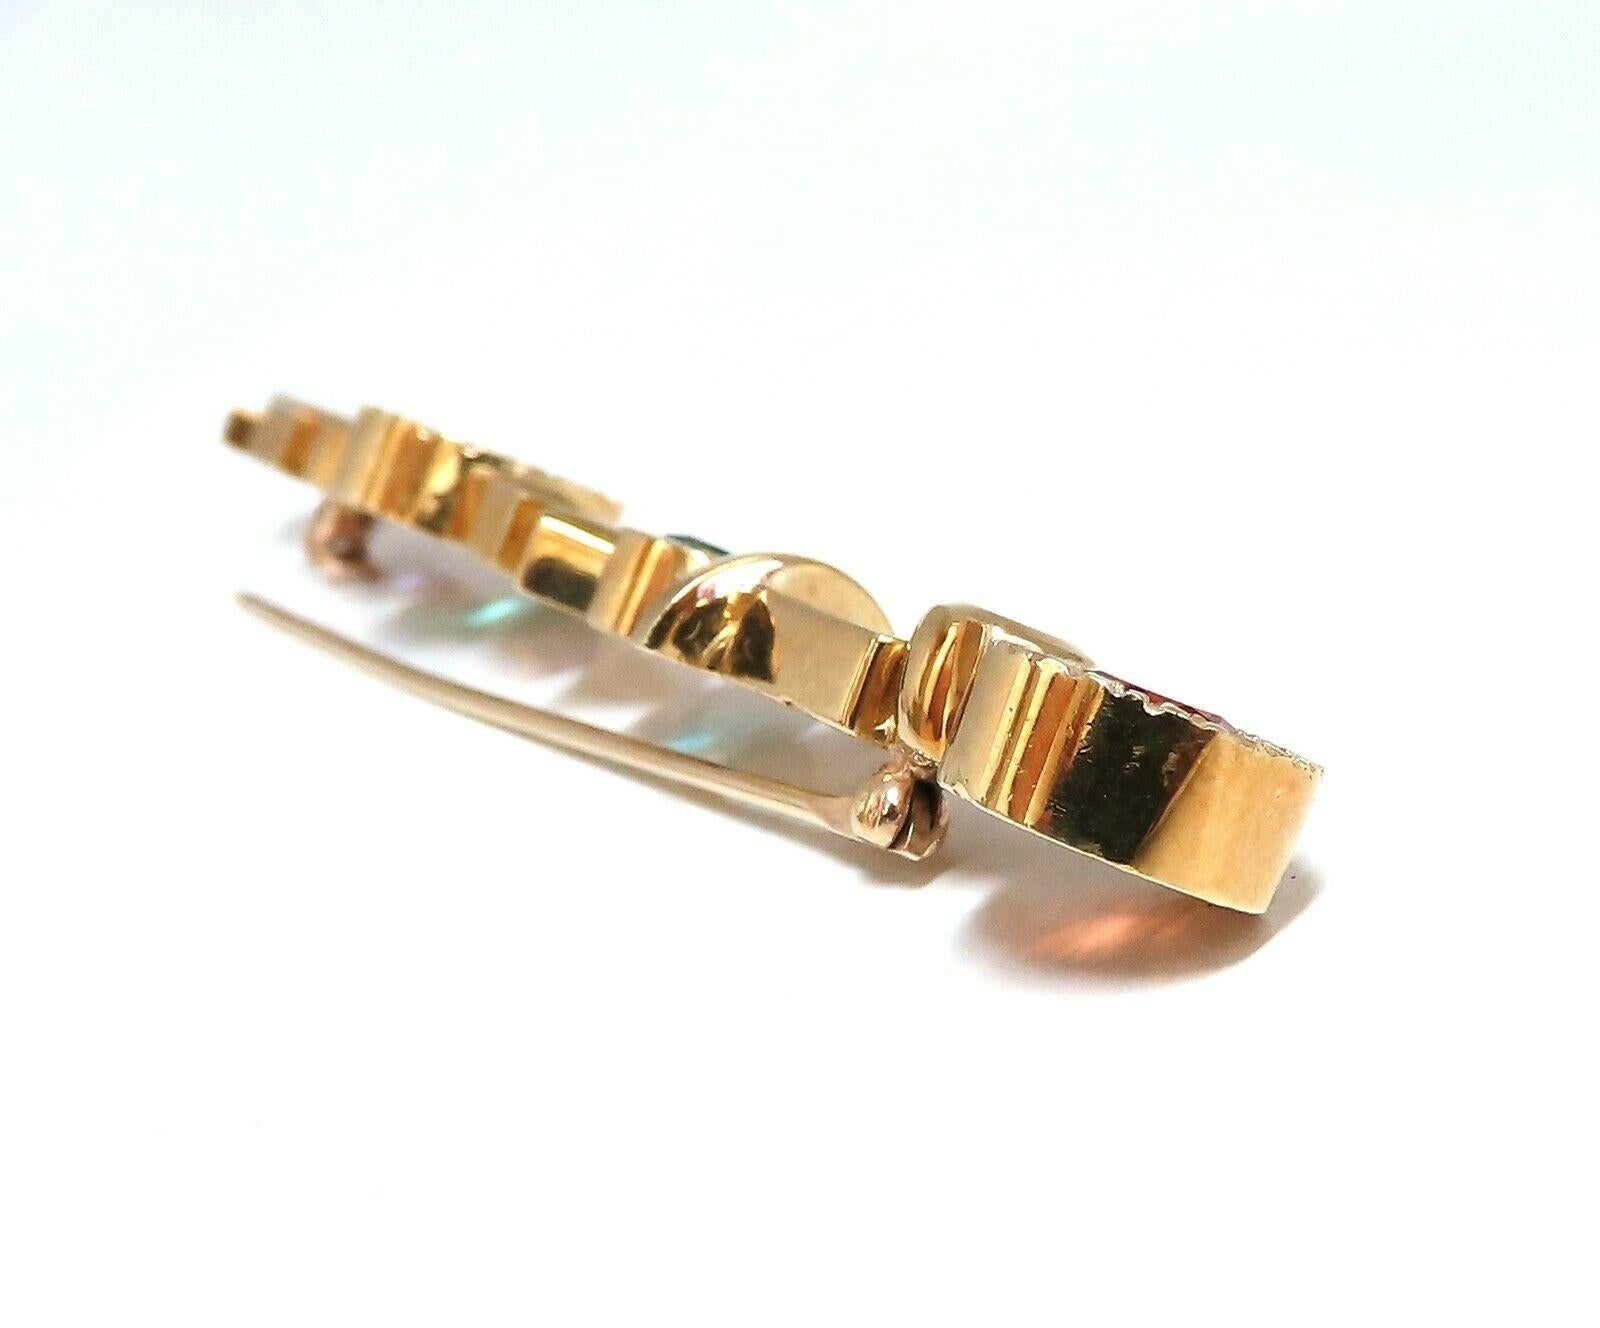 Direction Arrow Pin / Hair Pin.

11.00cts of natural Semi Precious Gems.

Round & Square cuts.

.30ct Diamonds

I-color  Vs-2 clarity.

Clean Clarity & Transparent

18kt yellow gold 

25.1 grams.

Overall: 3.5 inch x .35 inch long

$6000 Appraisal